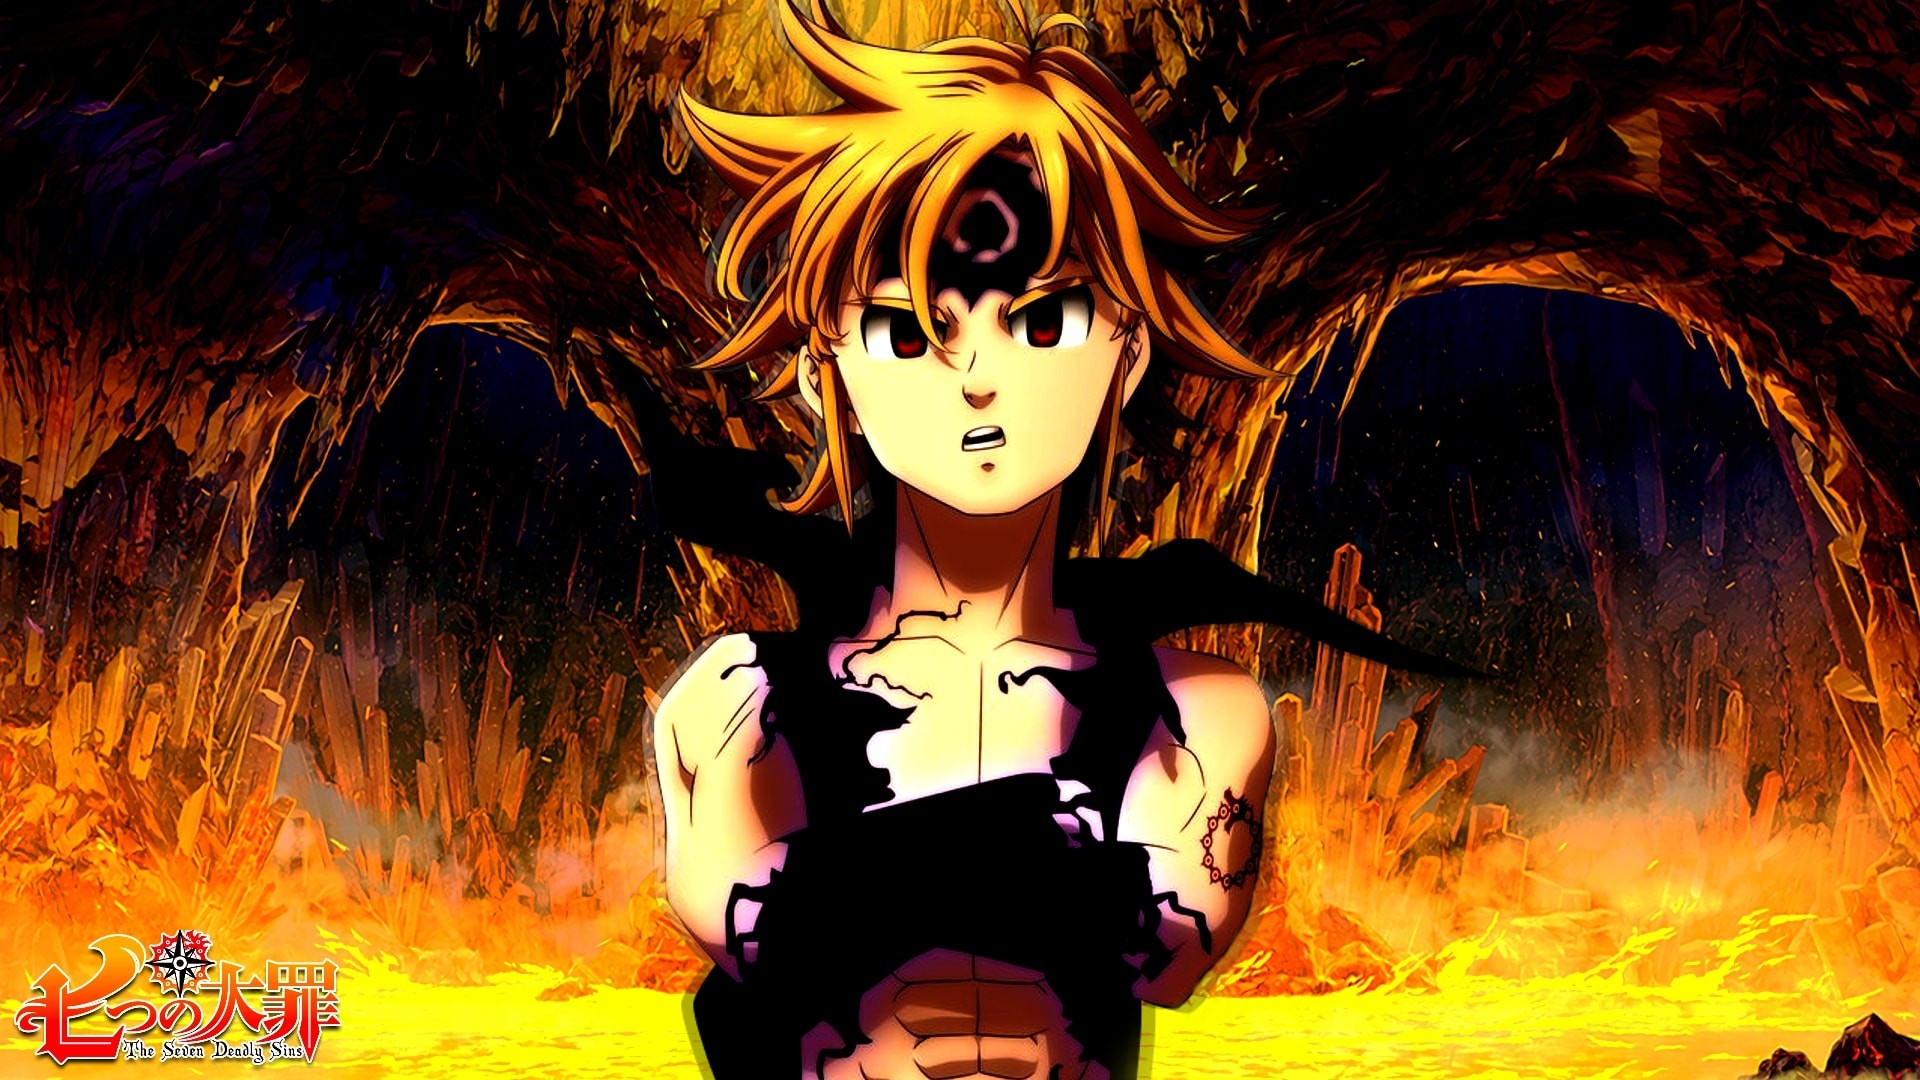 Wallpaper ID 362353  Anime The Seven Deadly Sins Phone Wallpaper  Meliodas The Seven Deadly Sins 1080x2340 free download